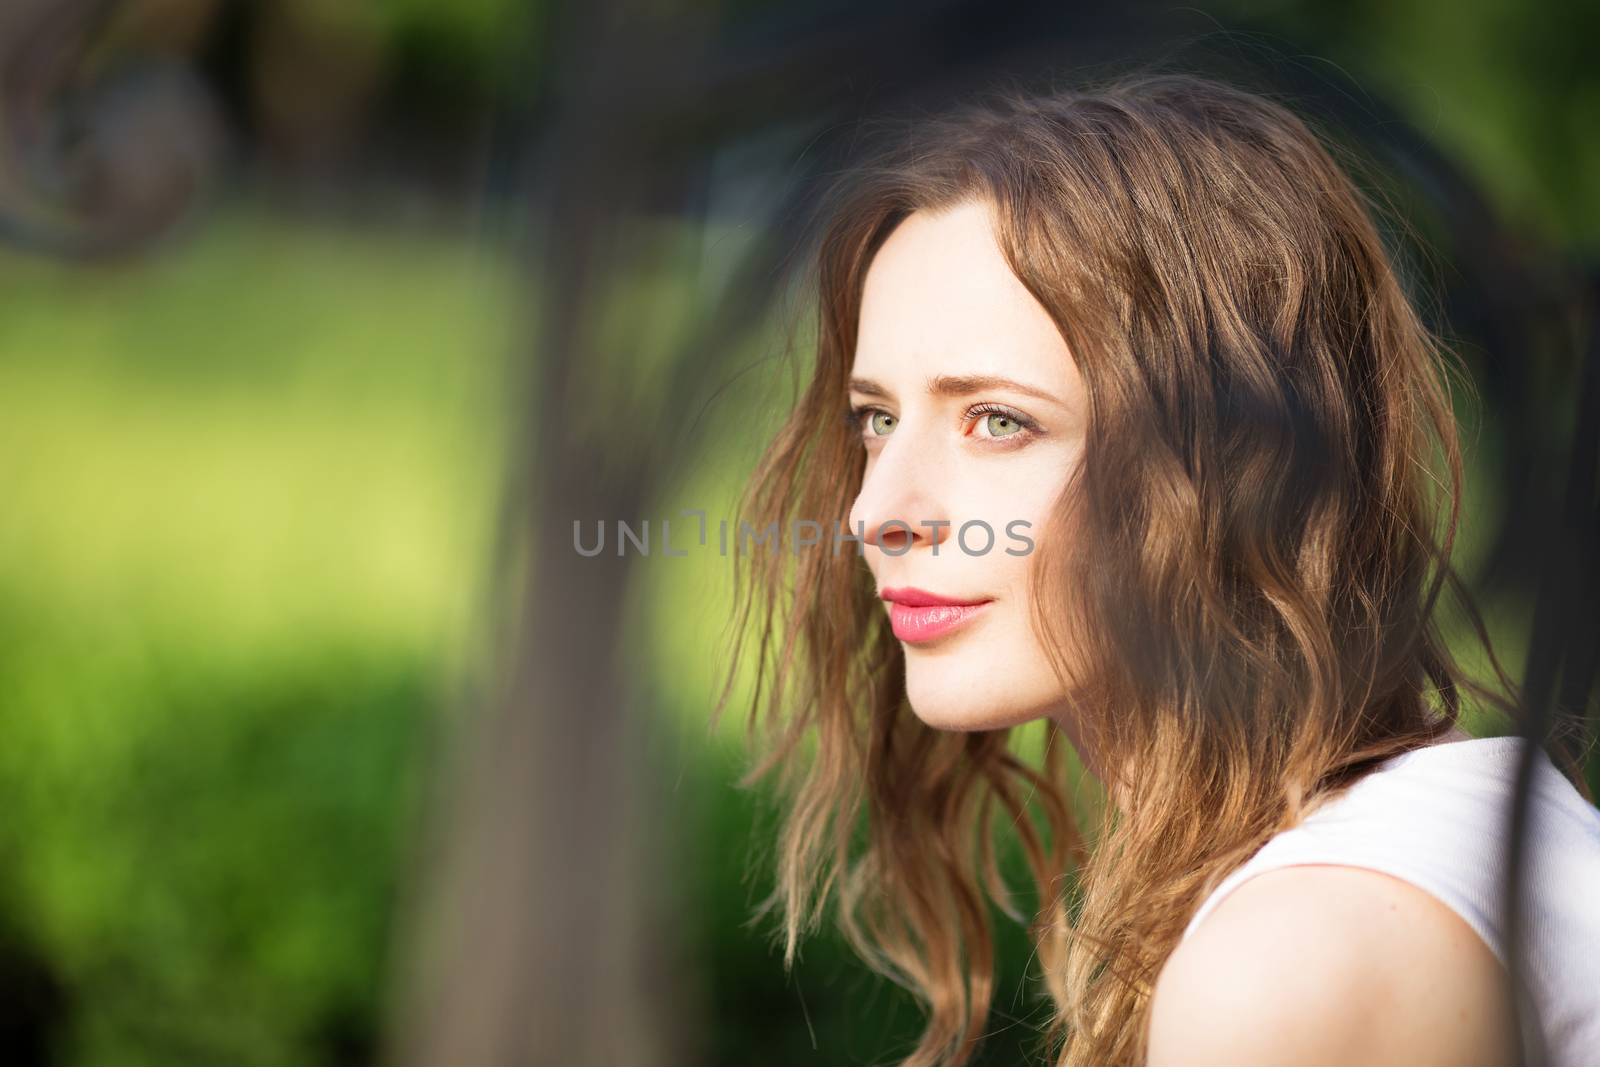 Close up portrait of lovely urban girl outdoors. Portrait of a happy smiling woman. Fashionable blonde girl sitting on a bench in a city park